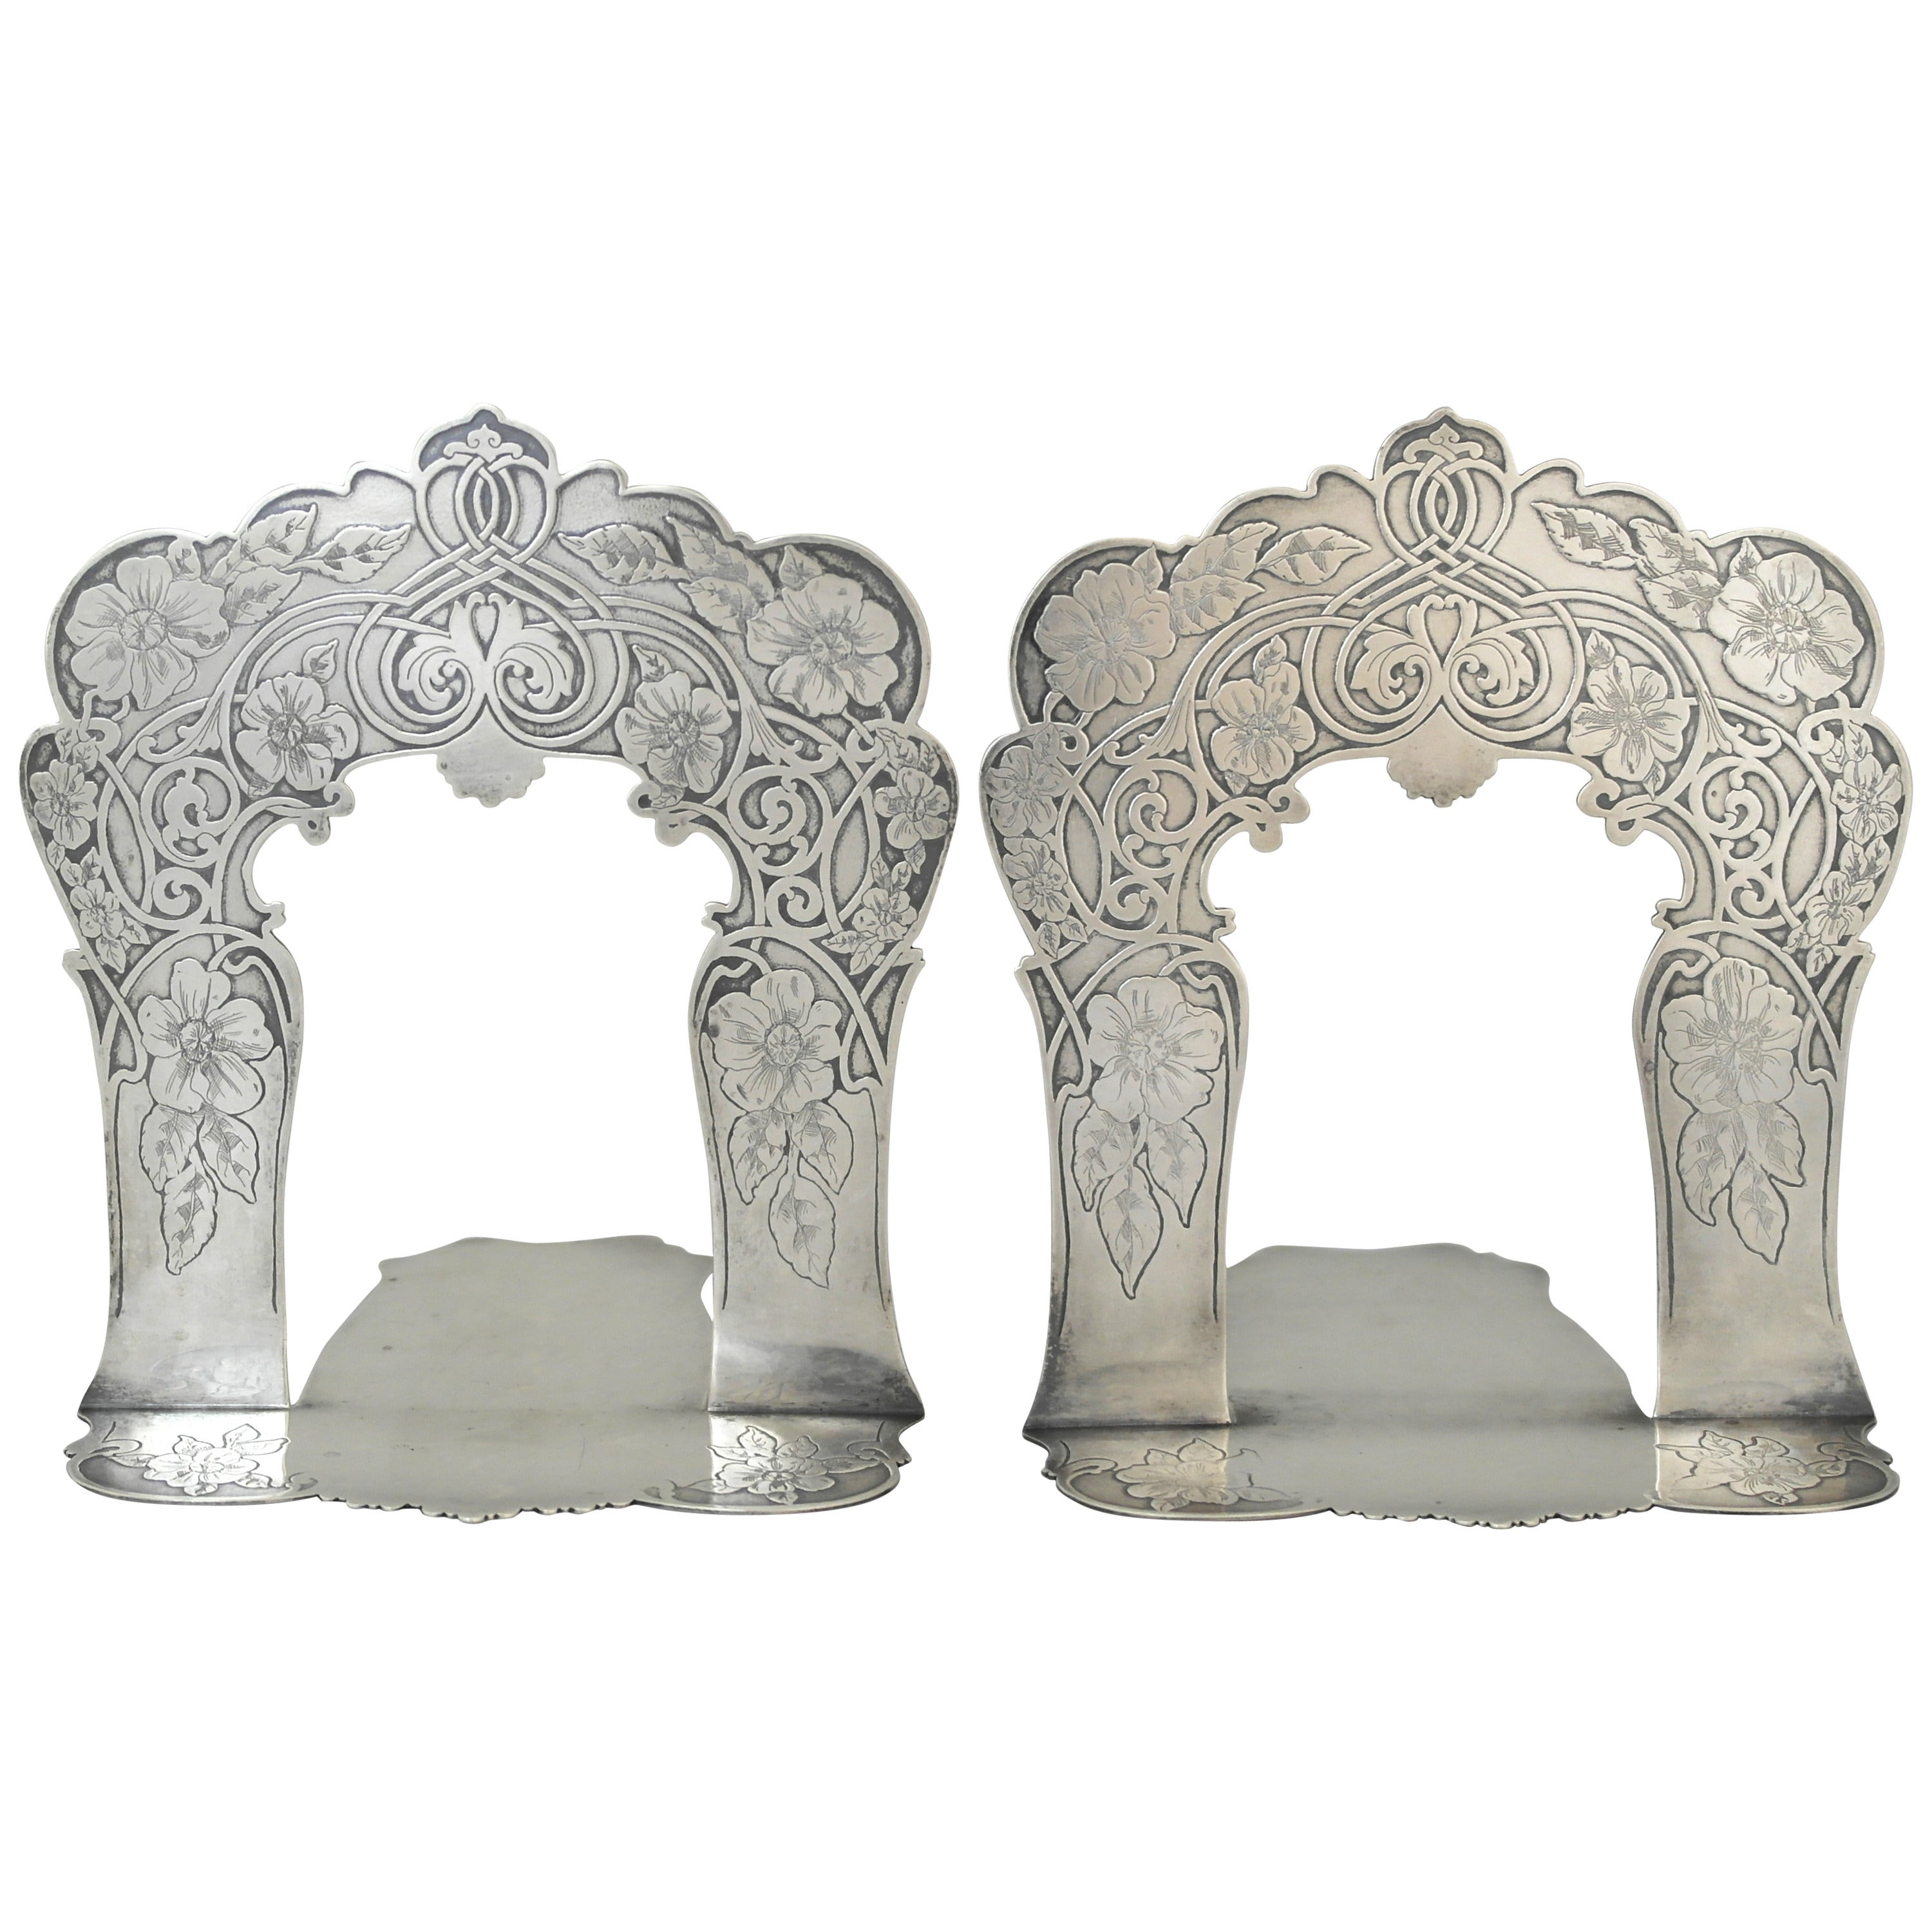 Museum Quality Tiffany & Co. Sterling Silver Pair of Bookends, 1905